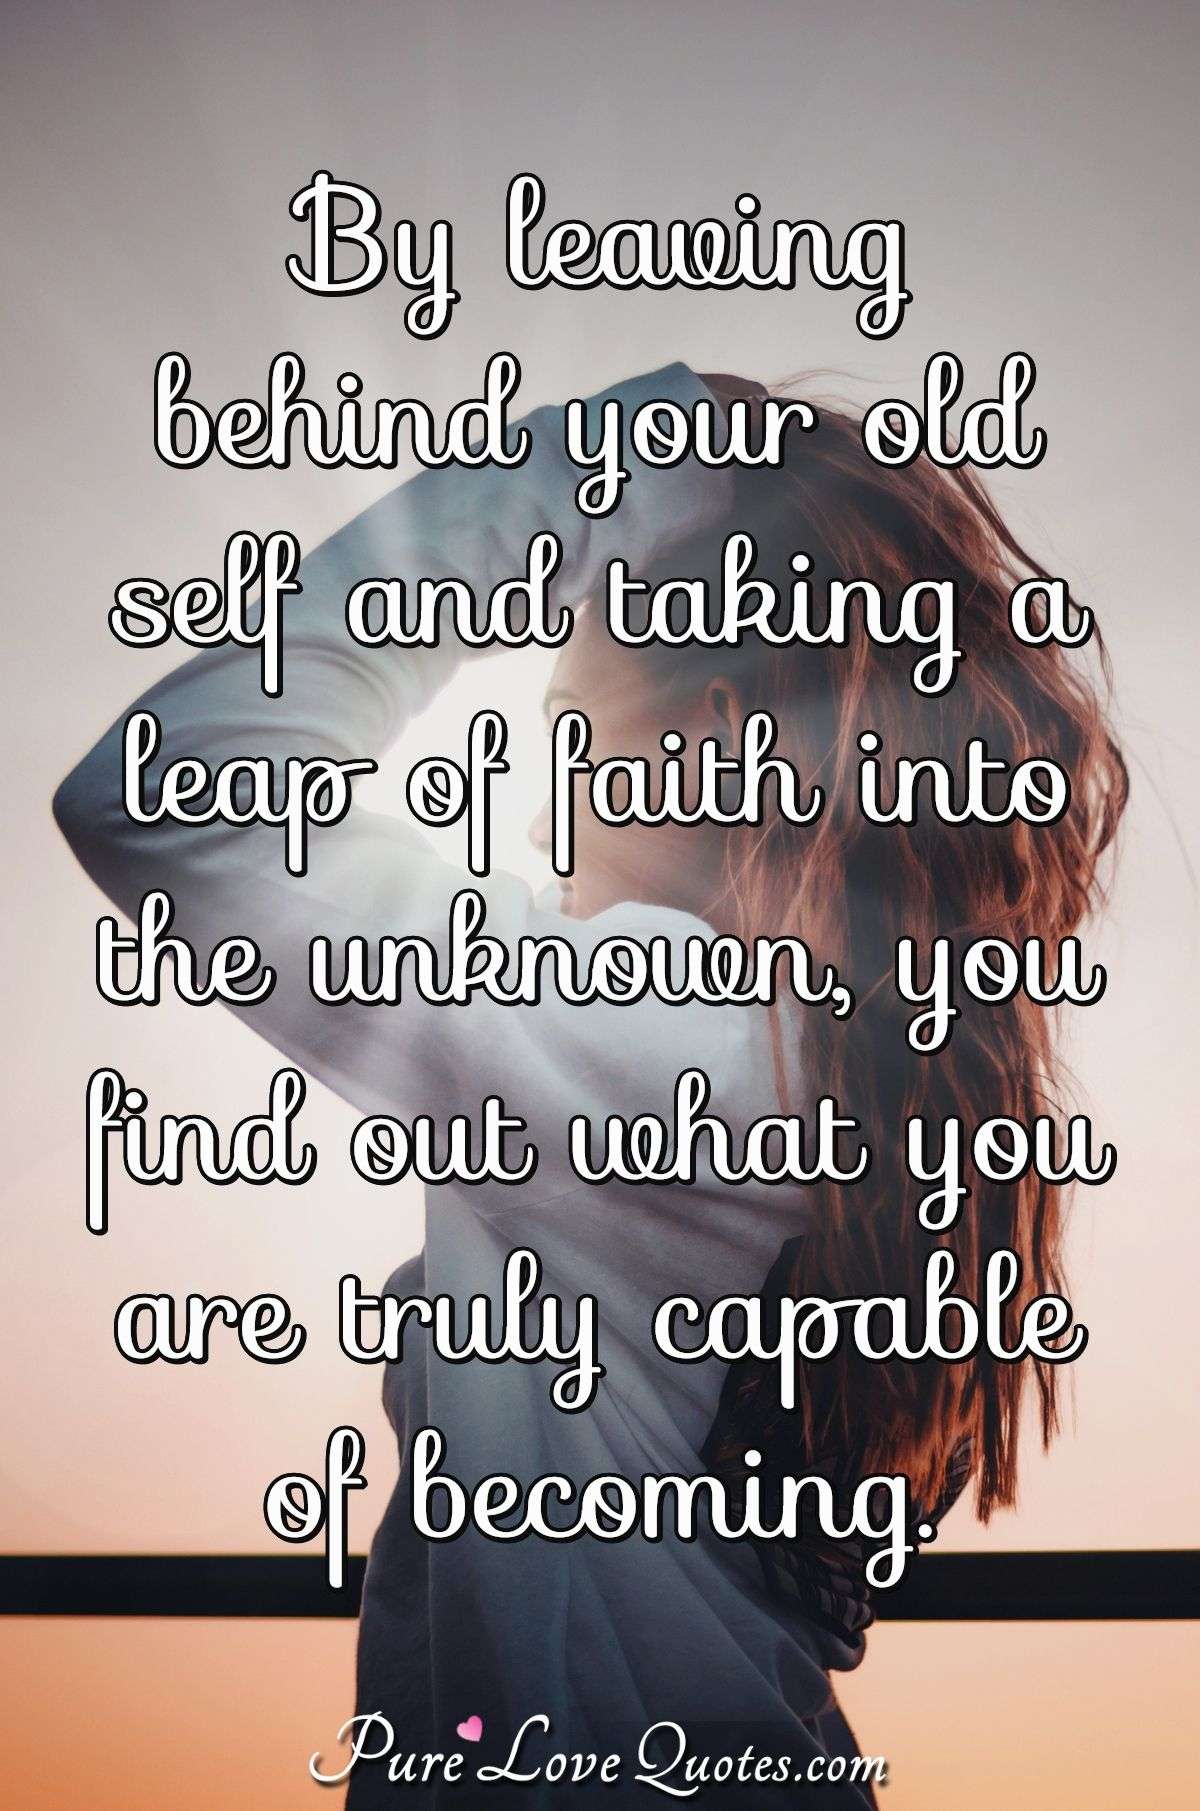 By leaving behind your old self and taking a leap of faith into the unknown, you find out what you are truly capable of becoming. - Anonymous